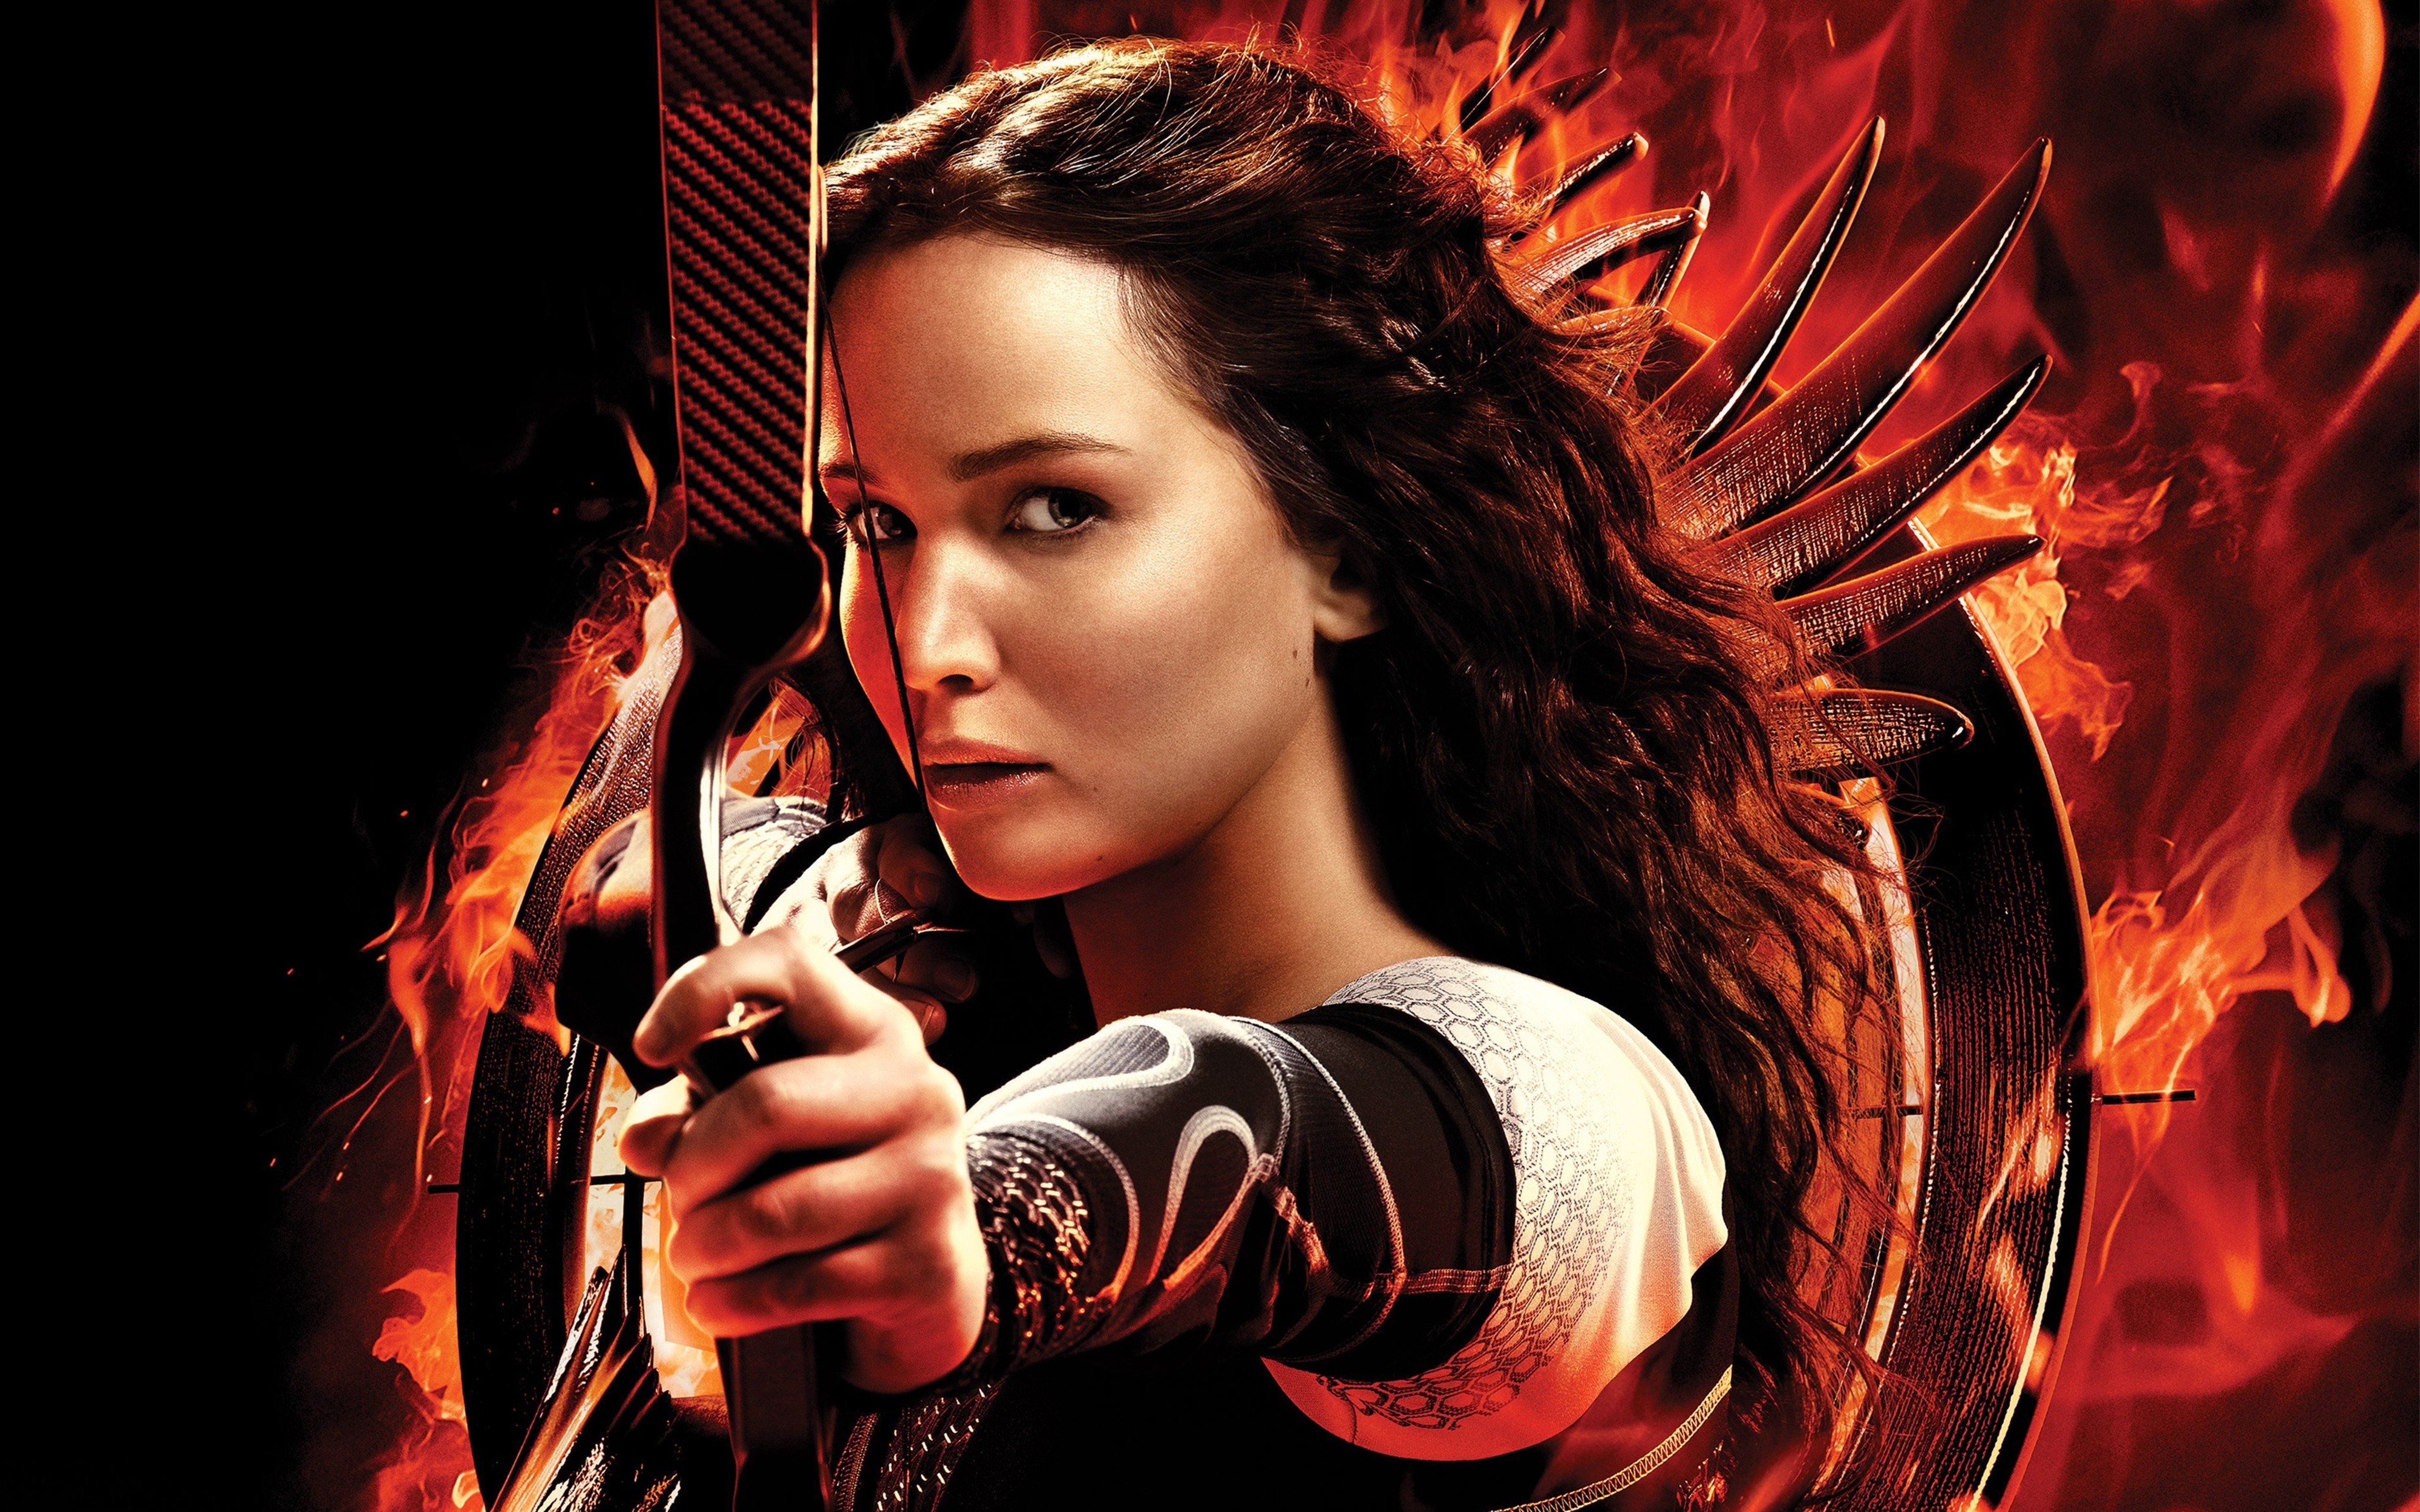 katniss, In, The, Hunger, Games, Catching, Fire, 4000x2500, Jennifer, Lawrence Wallpaper